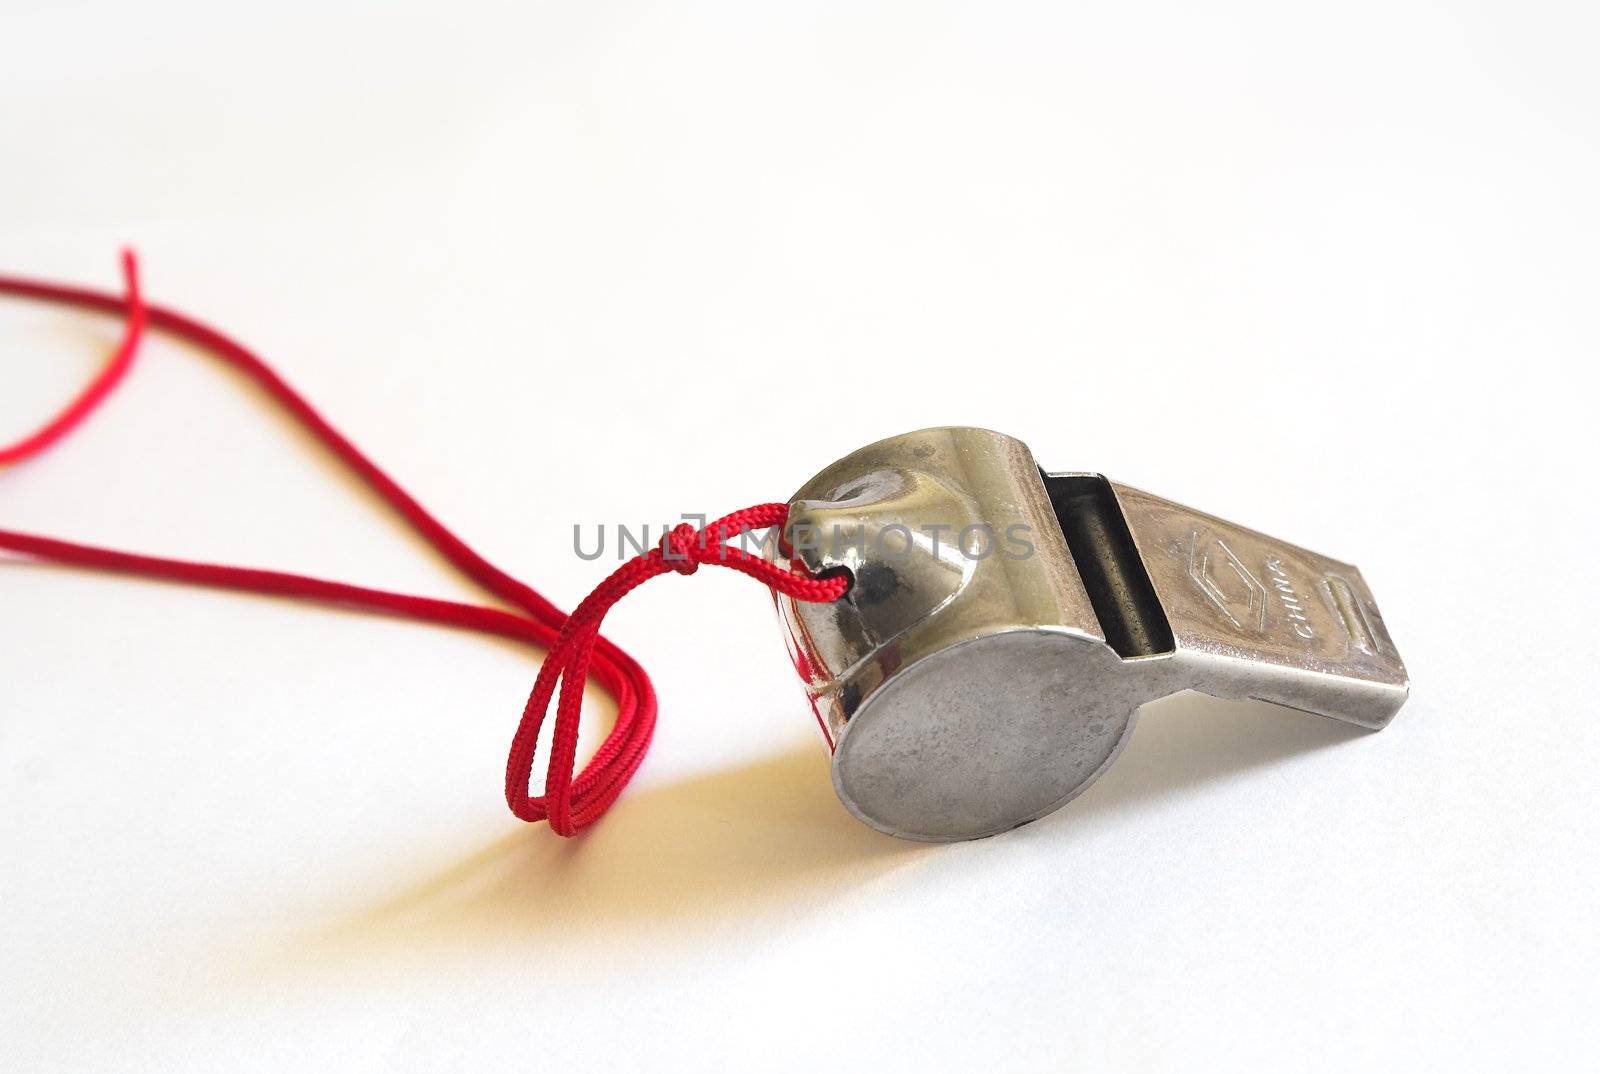 Metal whistle on a red cord shot on white background